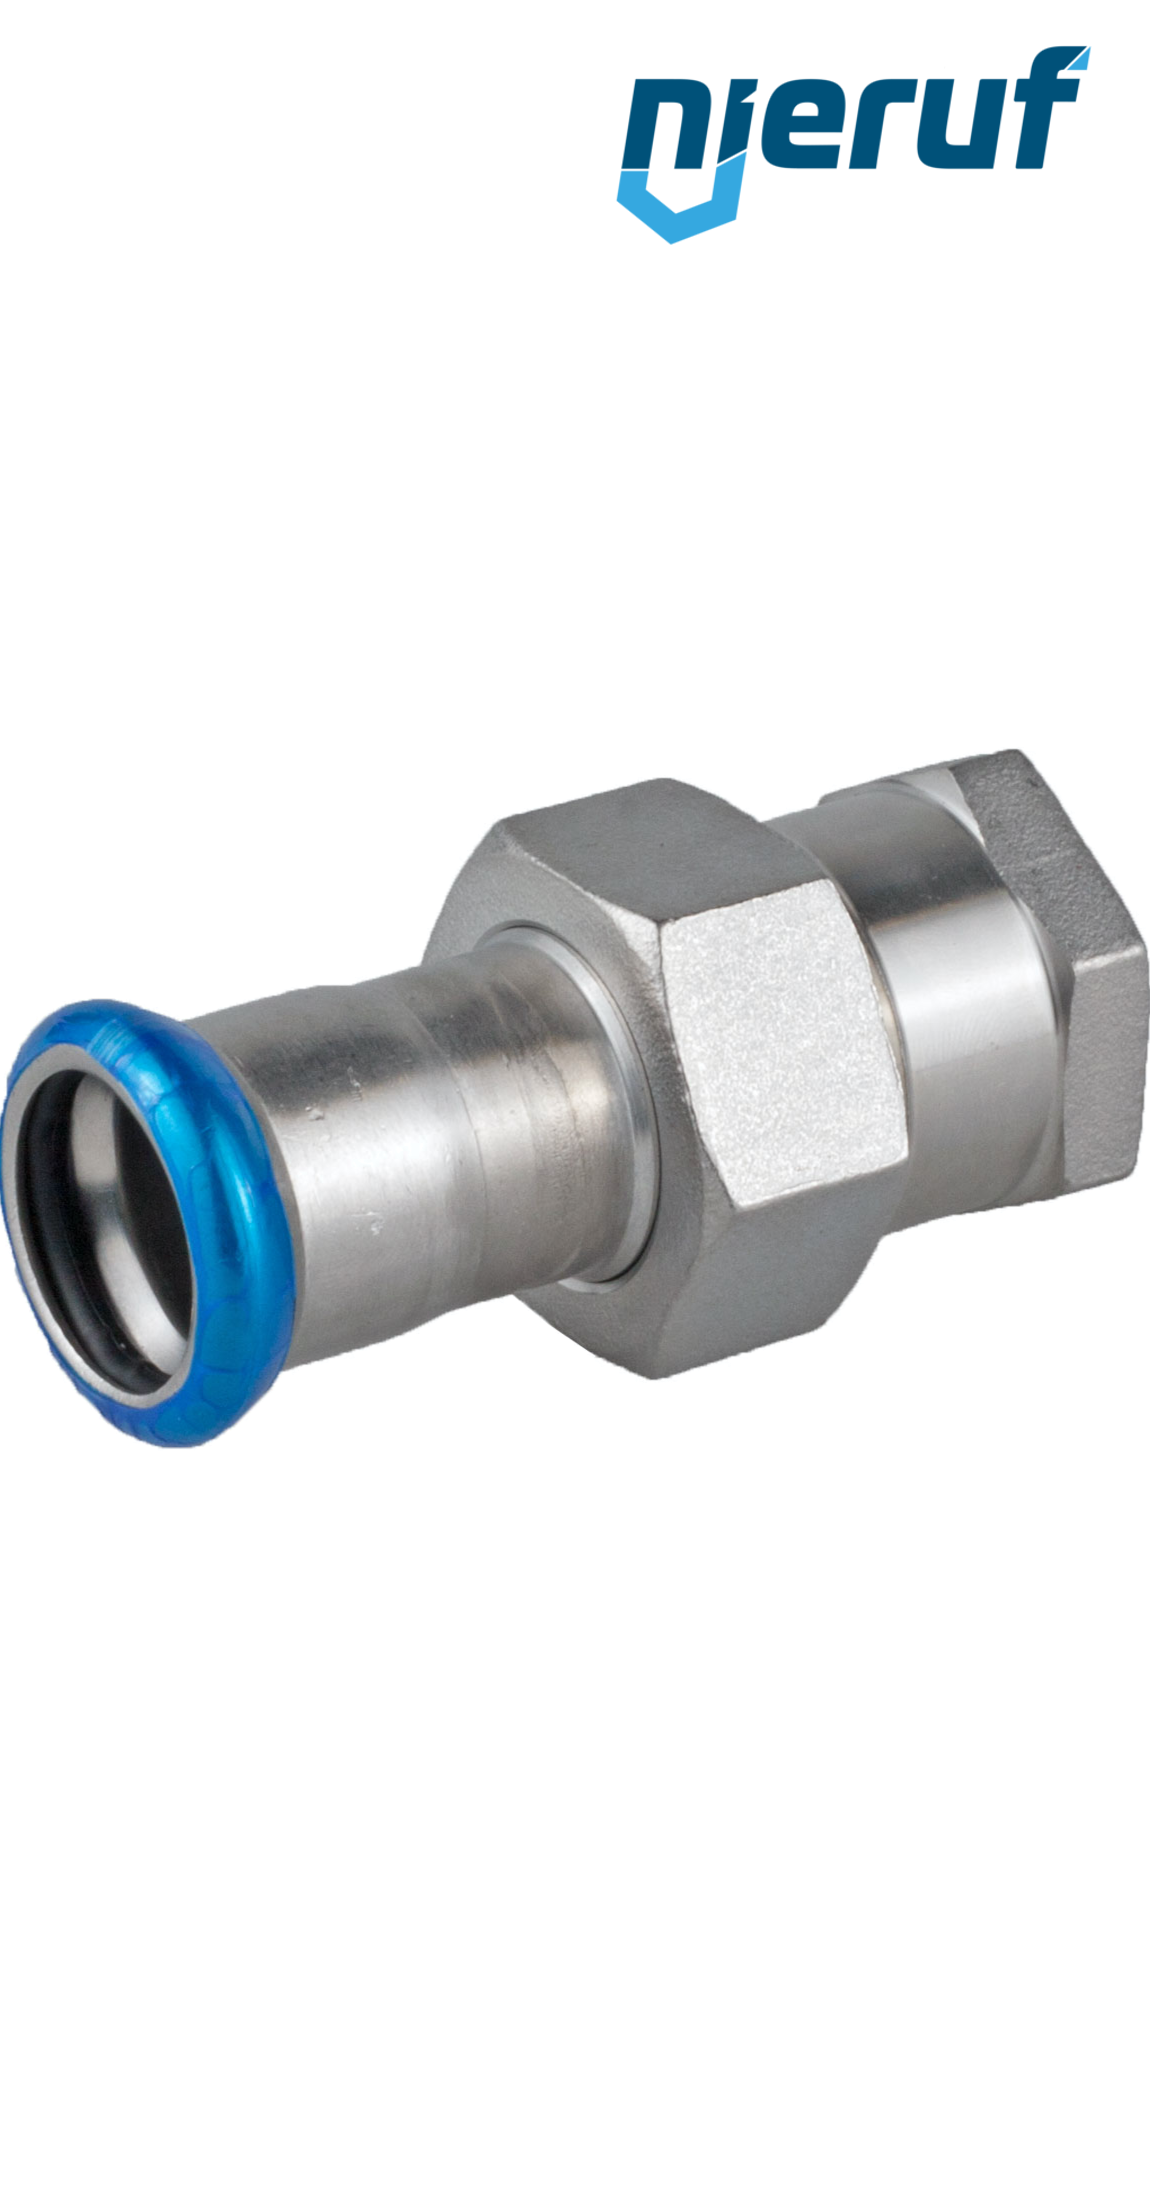 Union Coupling Pressfitting F DN20 - 22,0 mm female thread 1" inch stainless steel